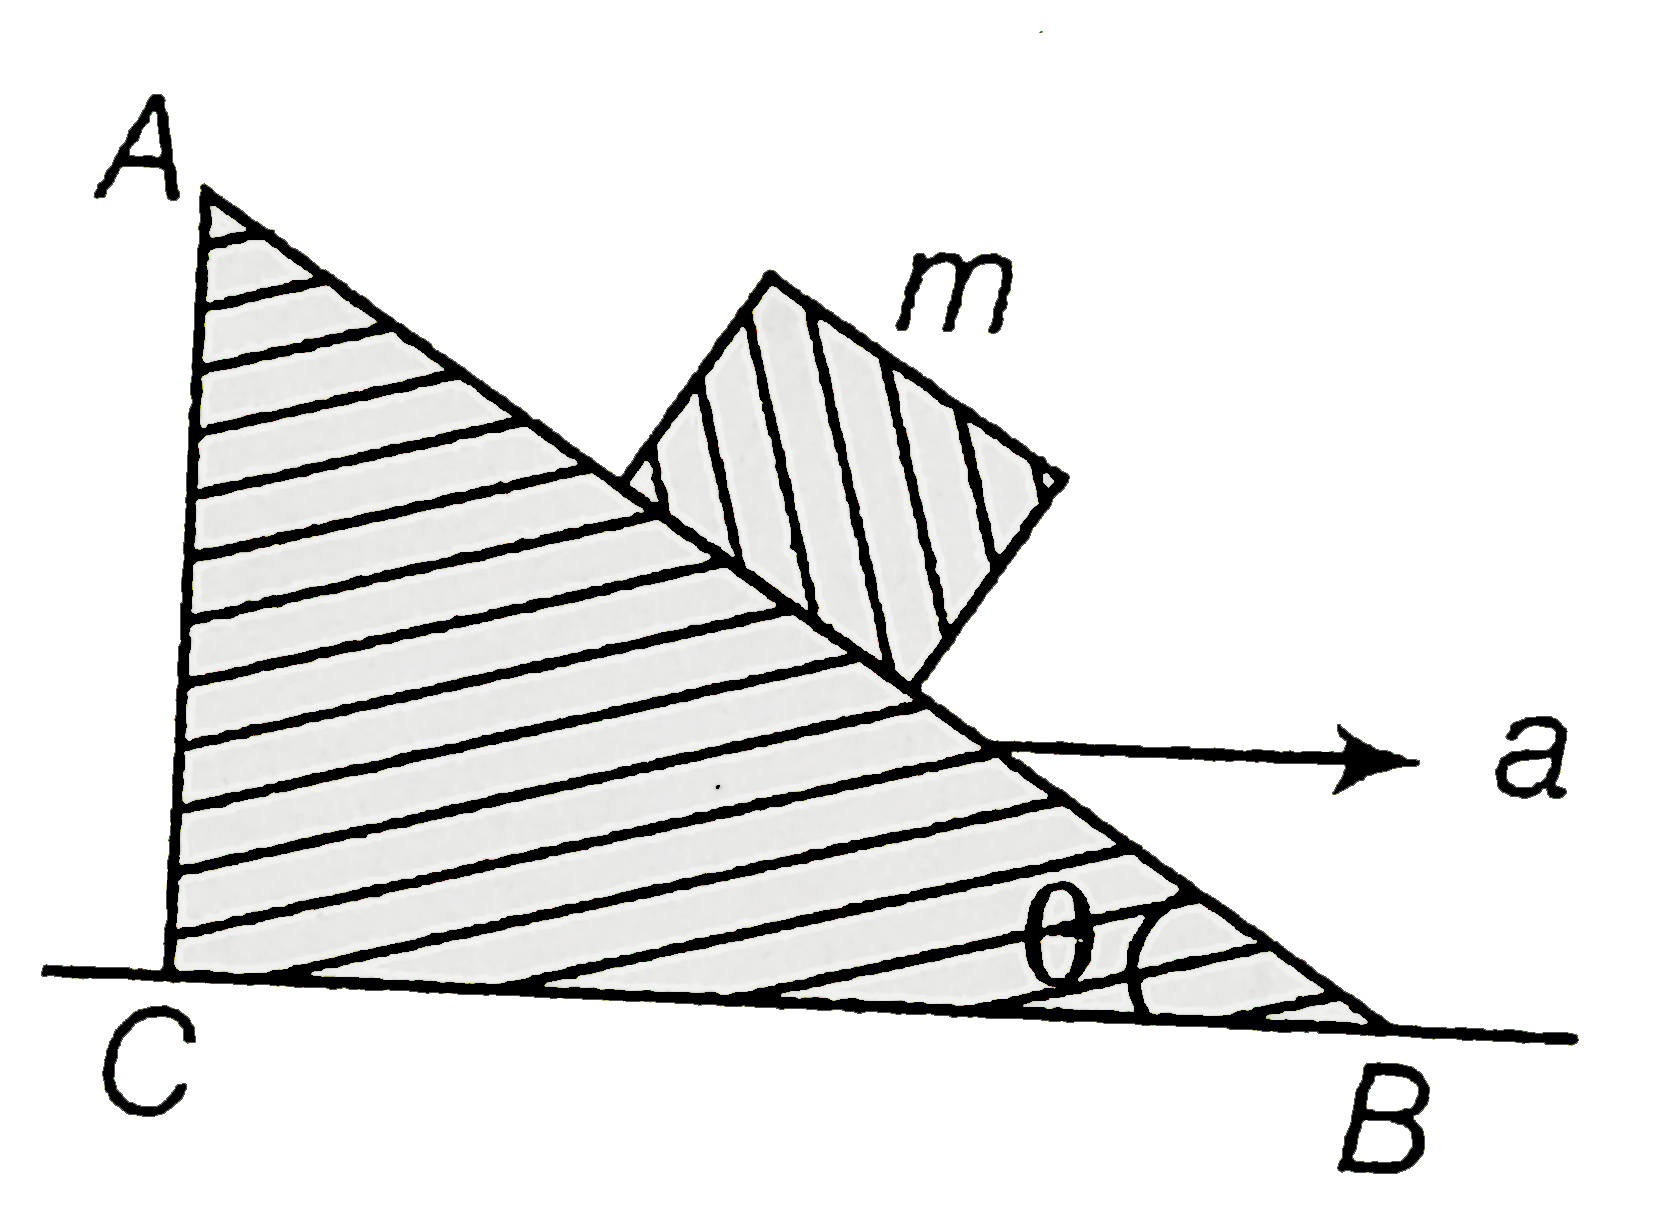 A block of mass m is placed on a smooth inclined wedge ABC of inclination thetaas shown in the figure .The wedge is given an acceleration alpha towards the righjt .The relation between alphaand theta for the block to remain stationary on the wedge is